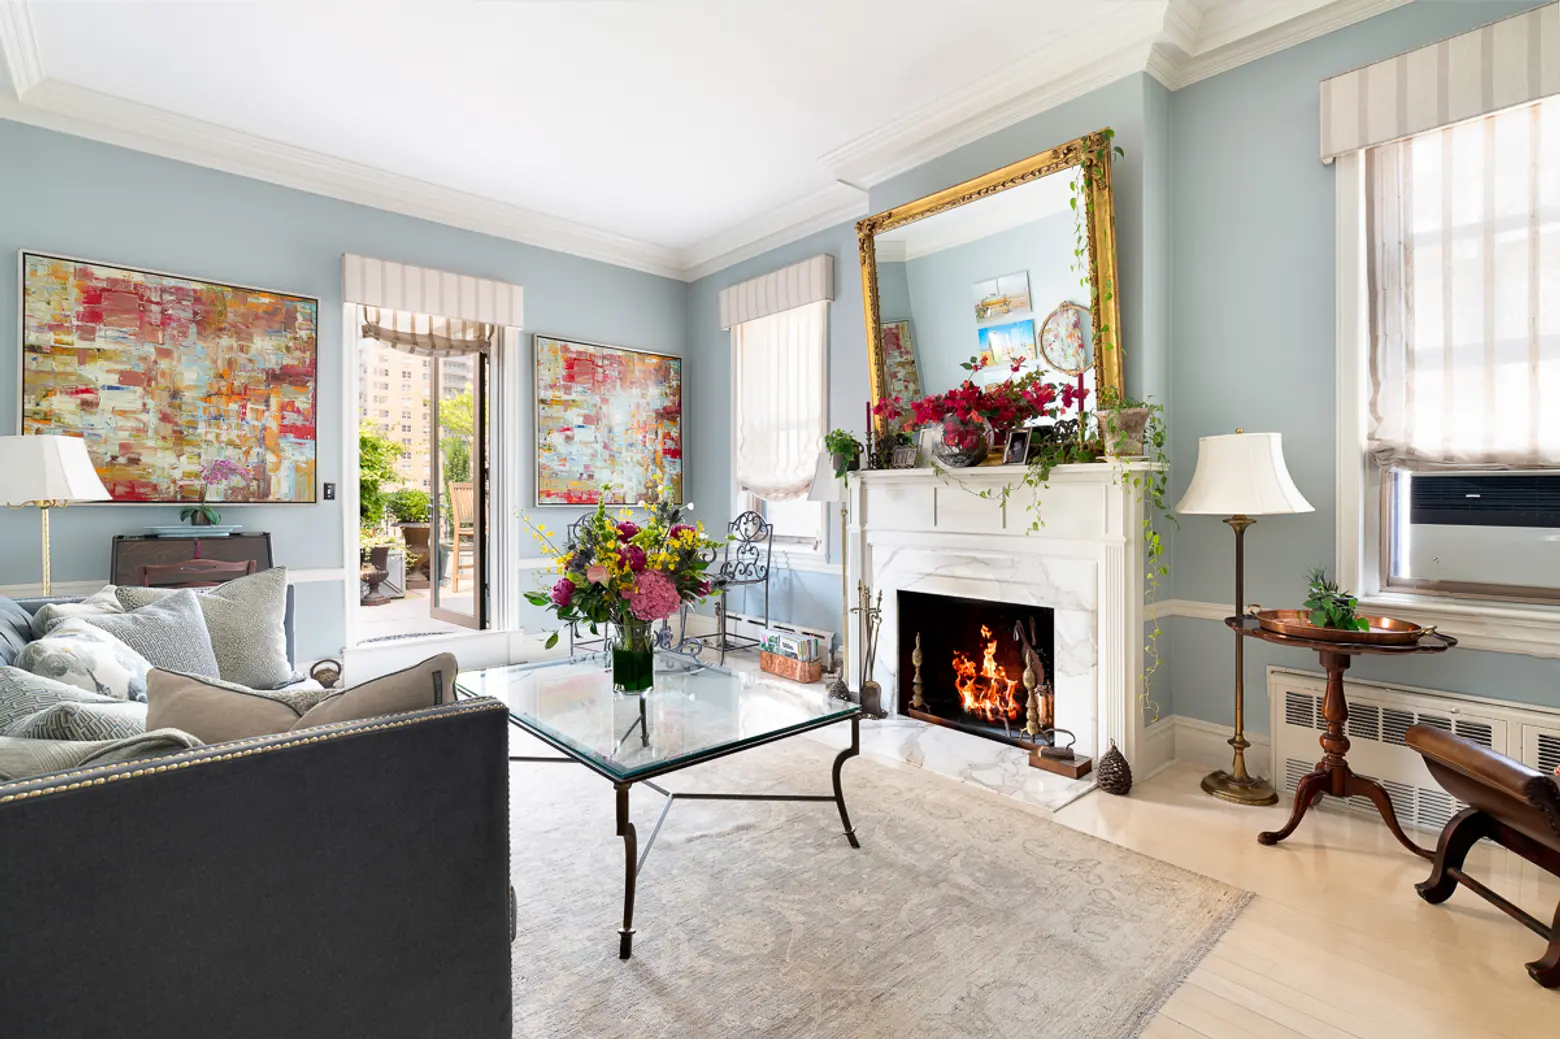 Asking $1.75M, this Upper East Side penthouse has pretty, pre-war details inside and out